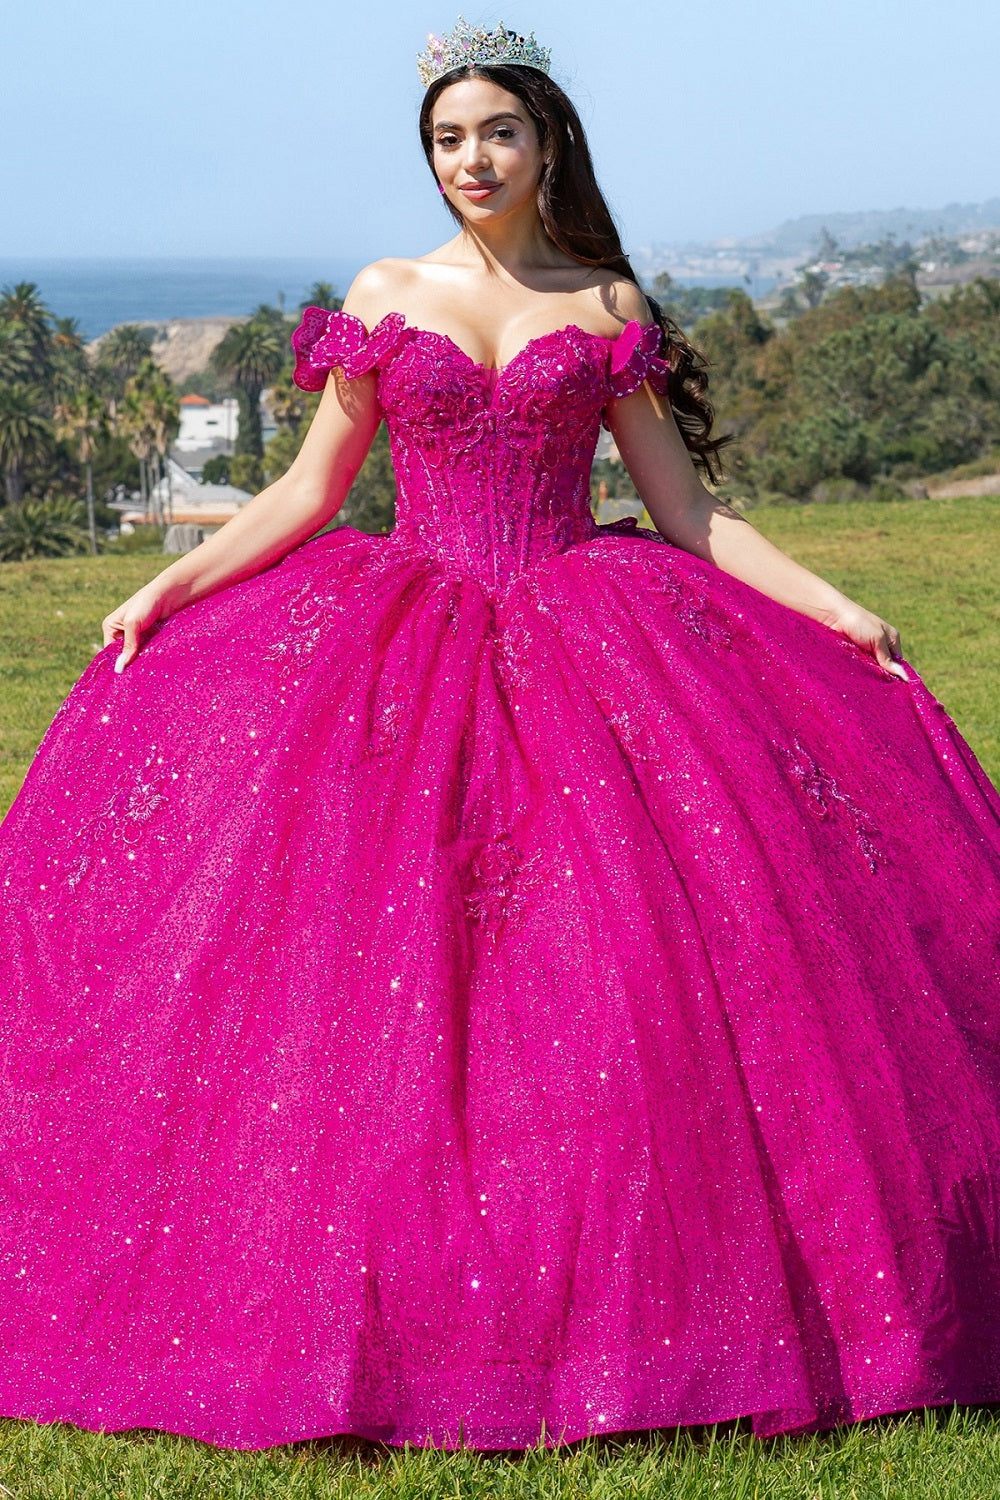 3D Butterfly Off Shoulder Ball Gown by Cinderella Couture 8120J